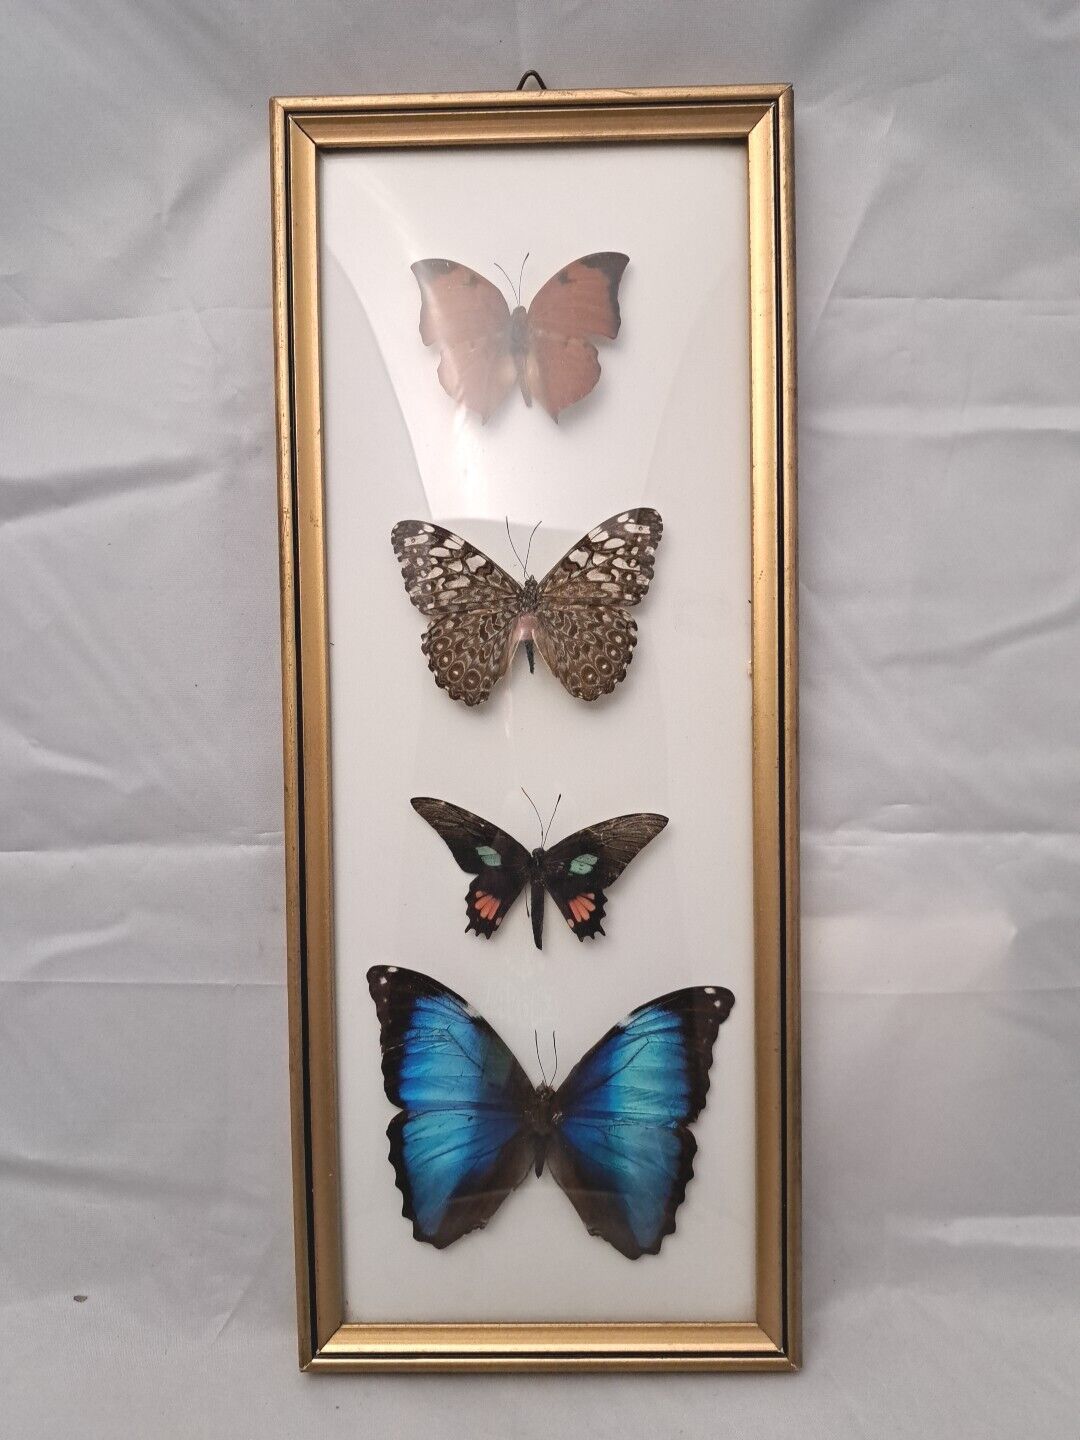 Butterfly Collection Giant Blue Morpho Parides Zacynthus, Zaretis Itys, Calico 2